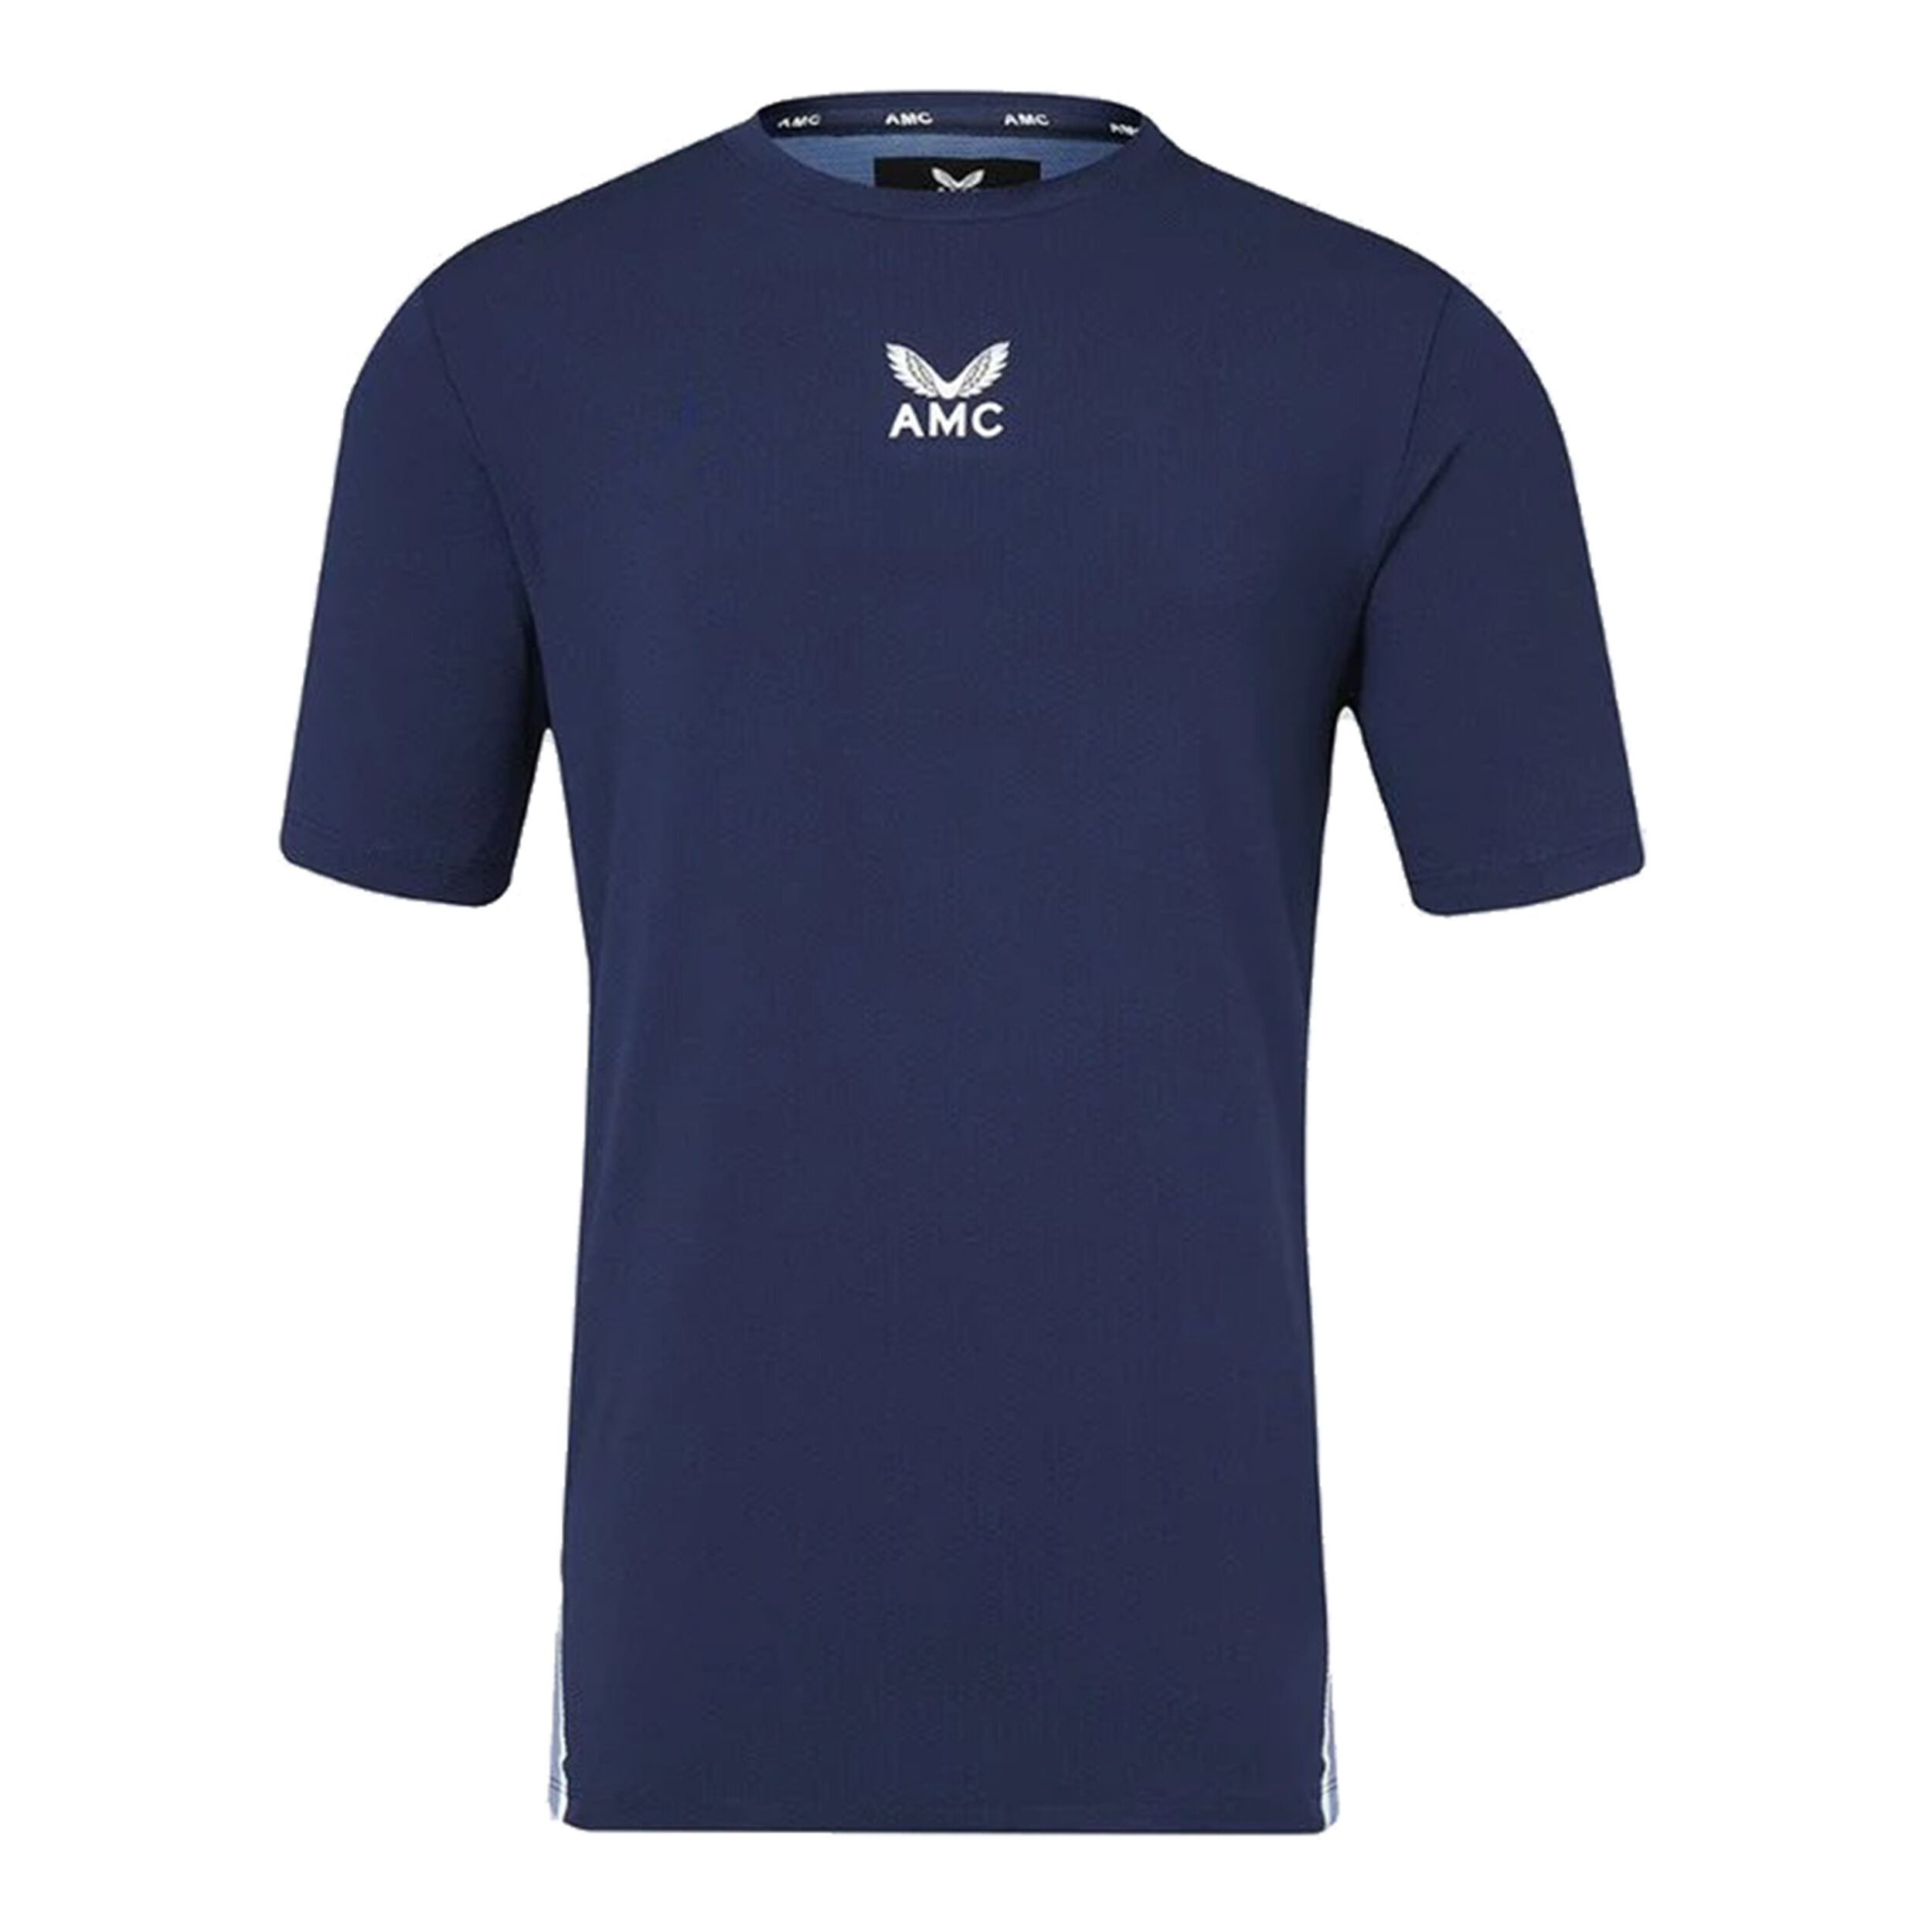 Buy Tennis clothing from Castore online | Tennis-Point